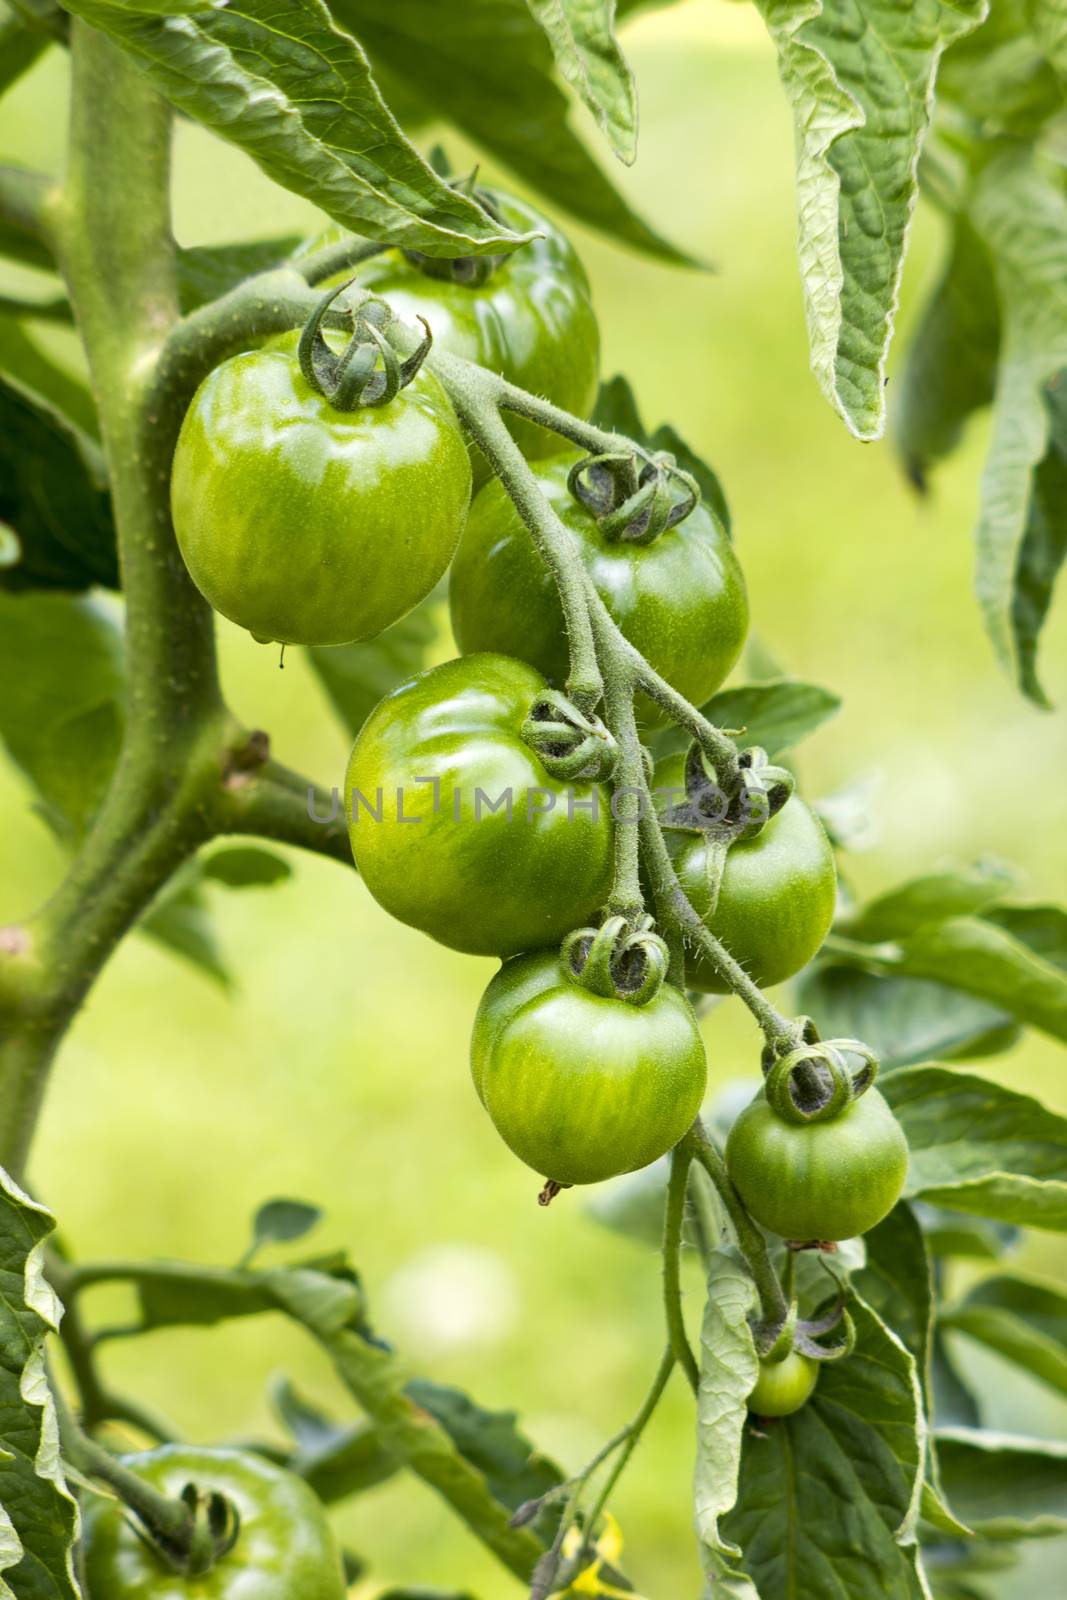 Green Tomatoes in a garden  by miradrozdowski